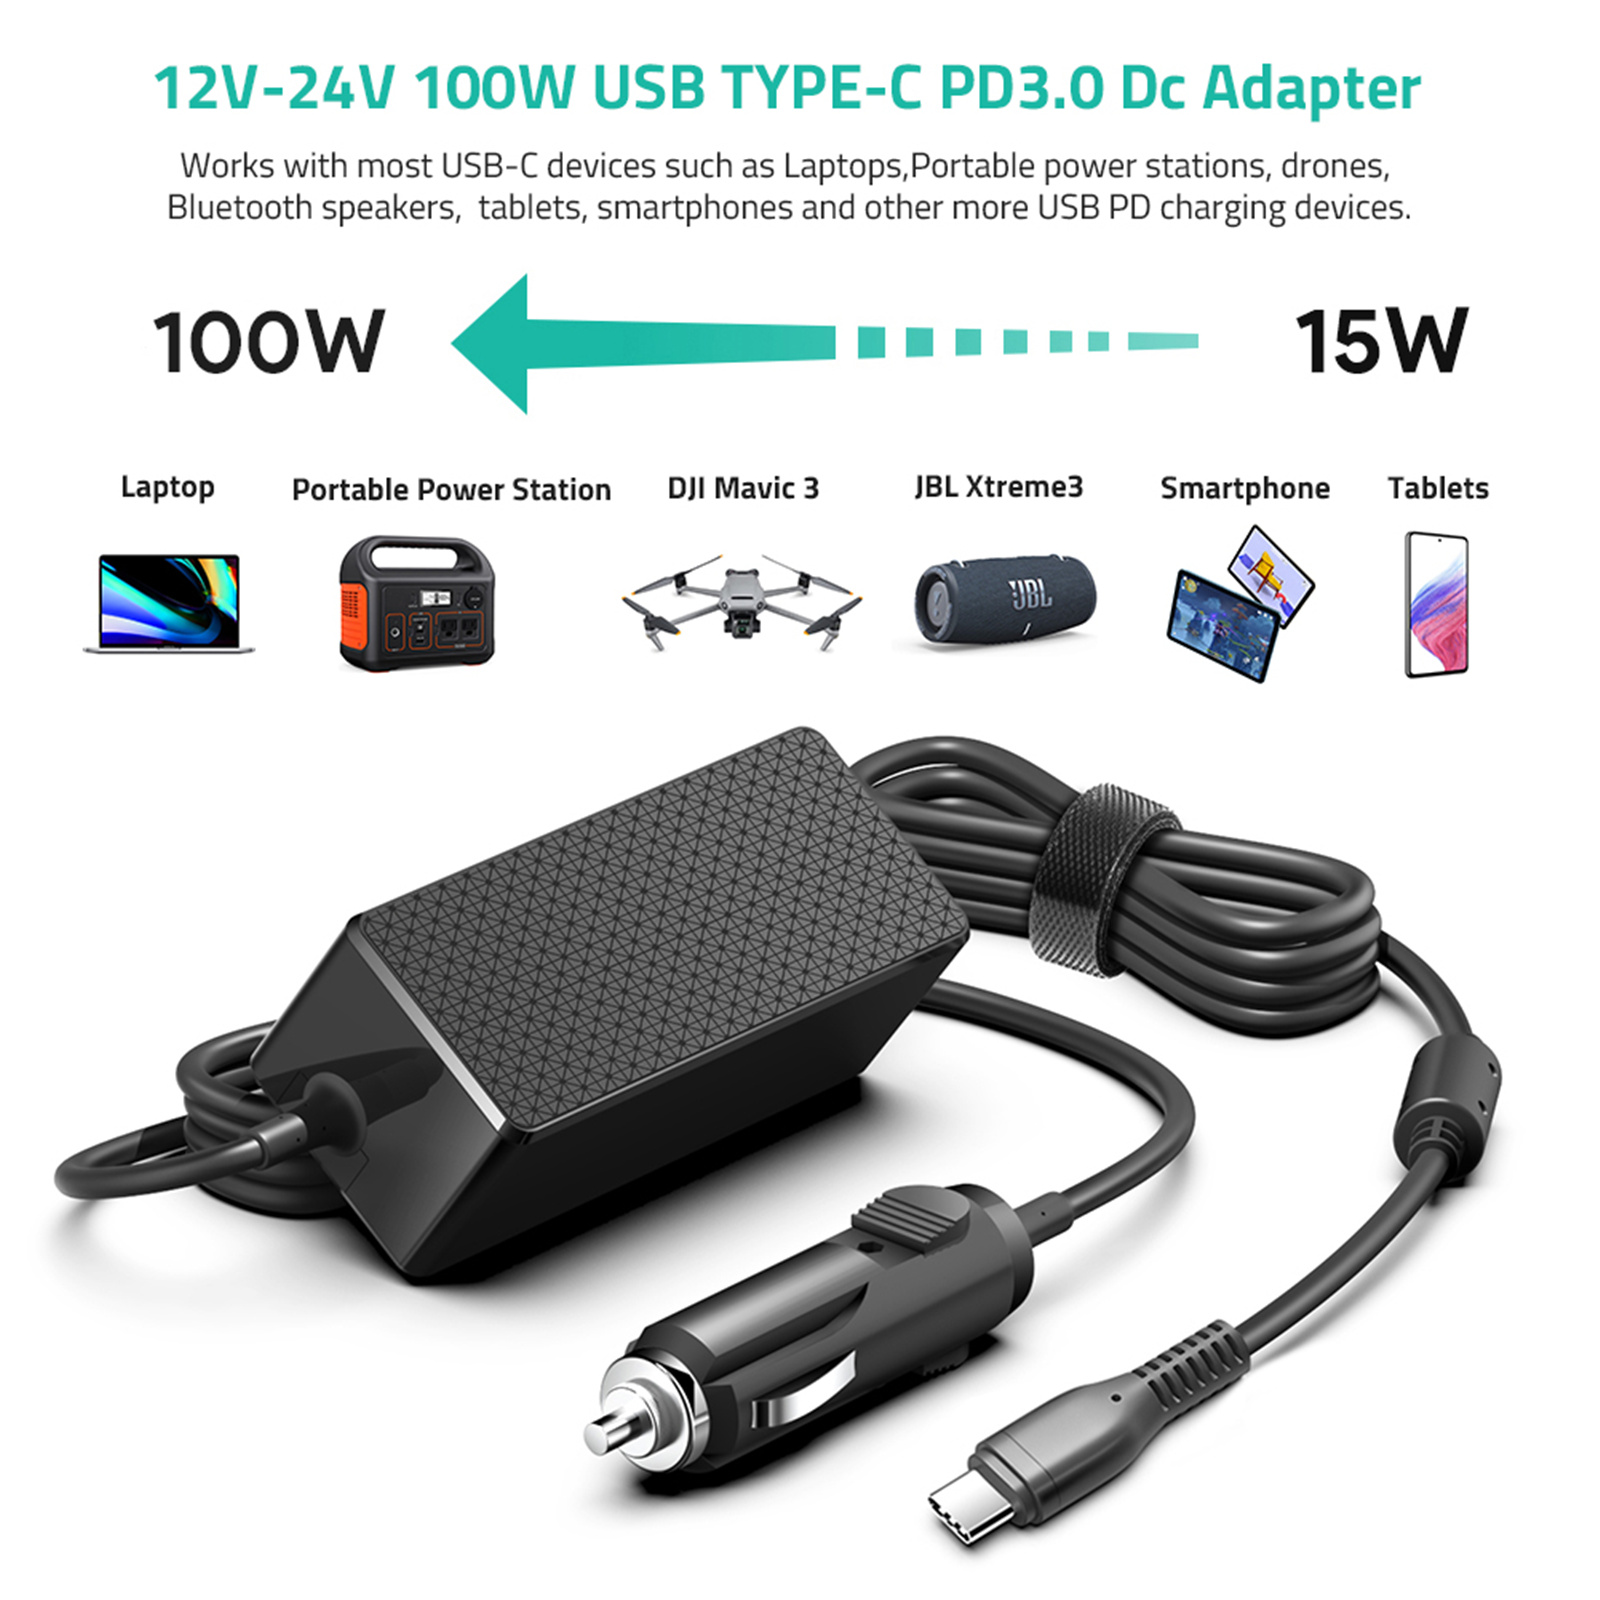 Buy the KFD Universal USB-C Laptop Car Charger 12V-24V 100W Compatible  With ( C100-100W USB C ) online - /au